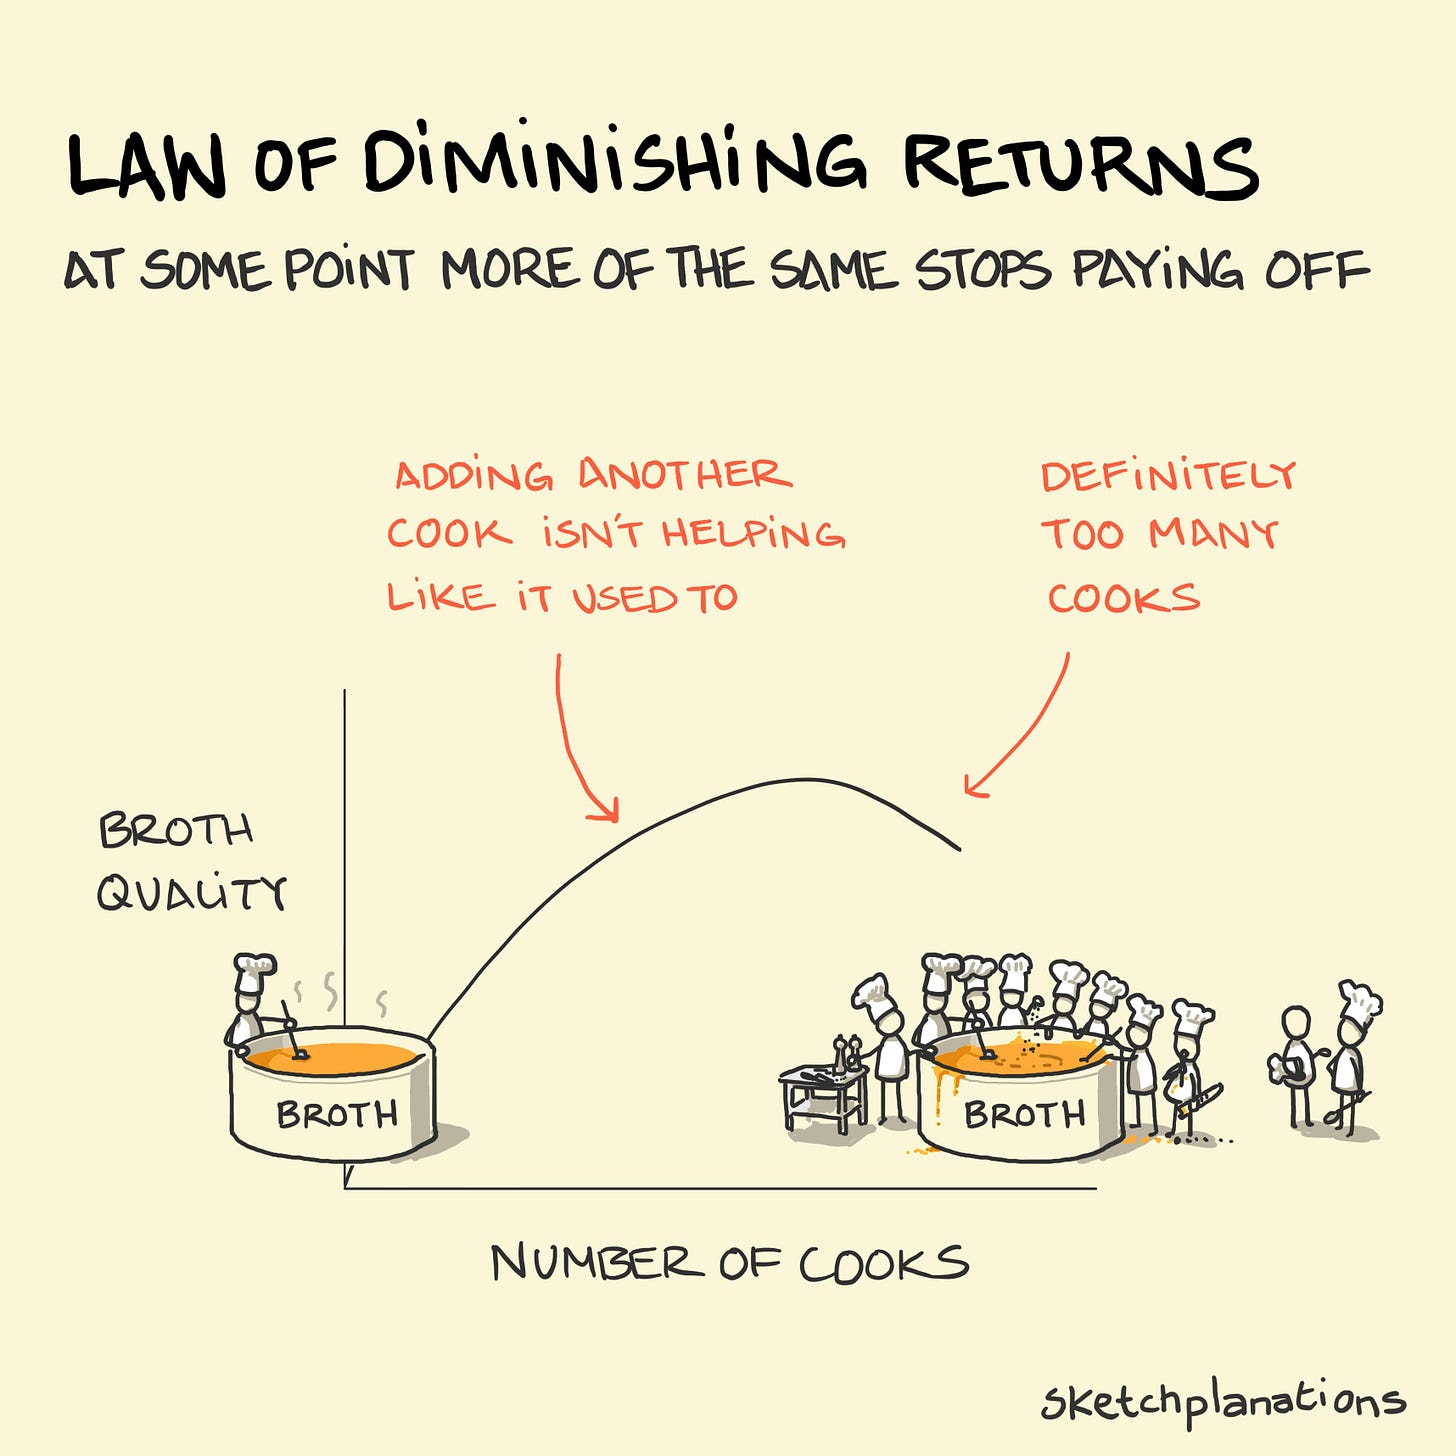 Law of diminishing returns - Sketchplanations